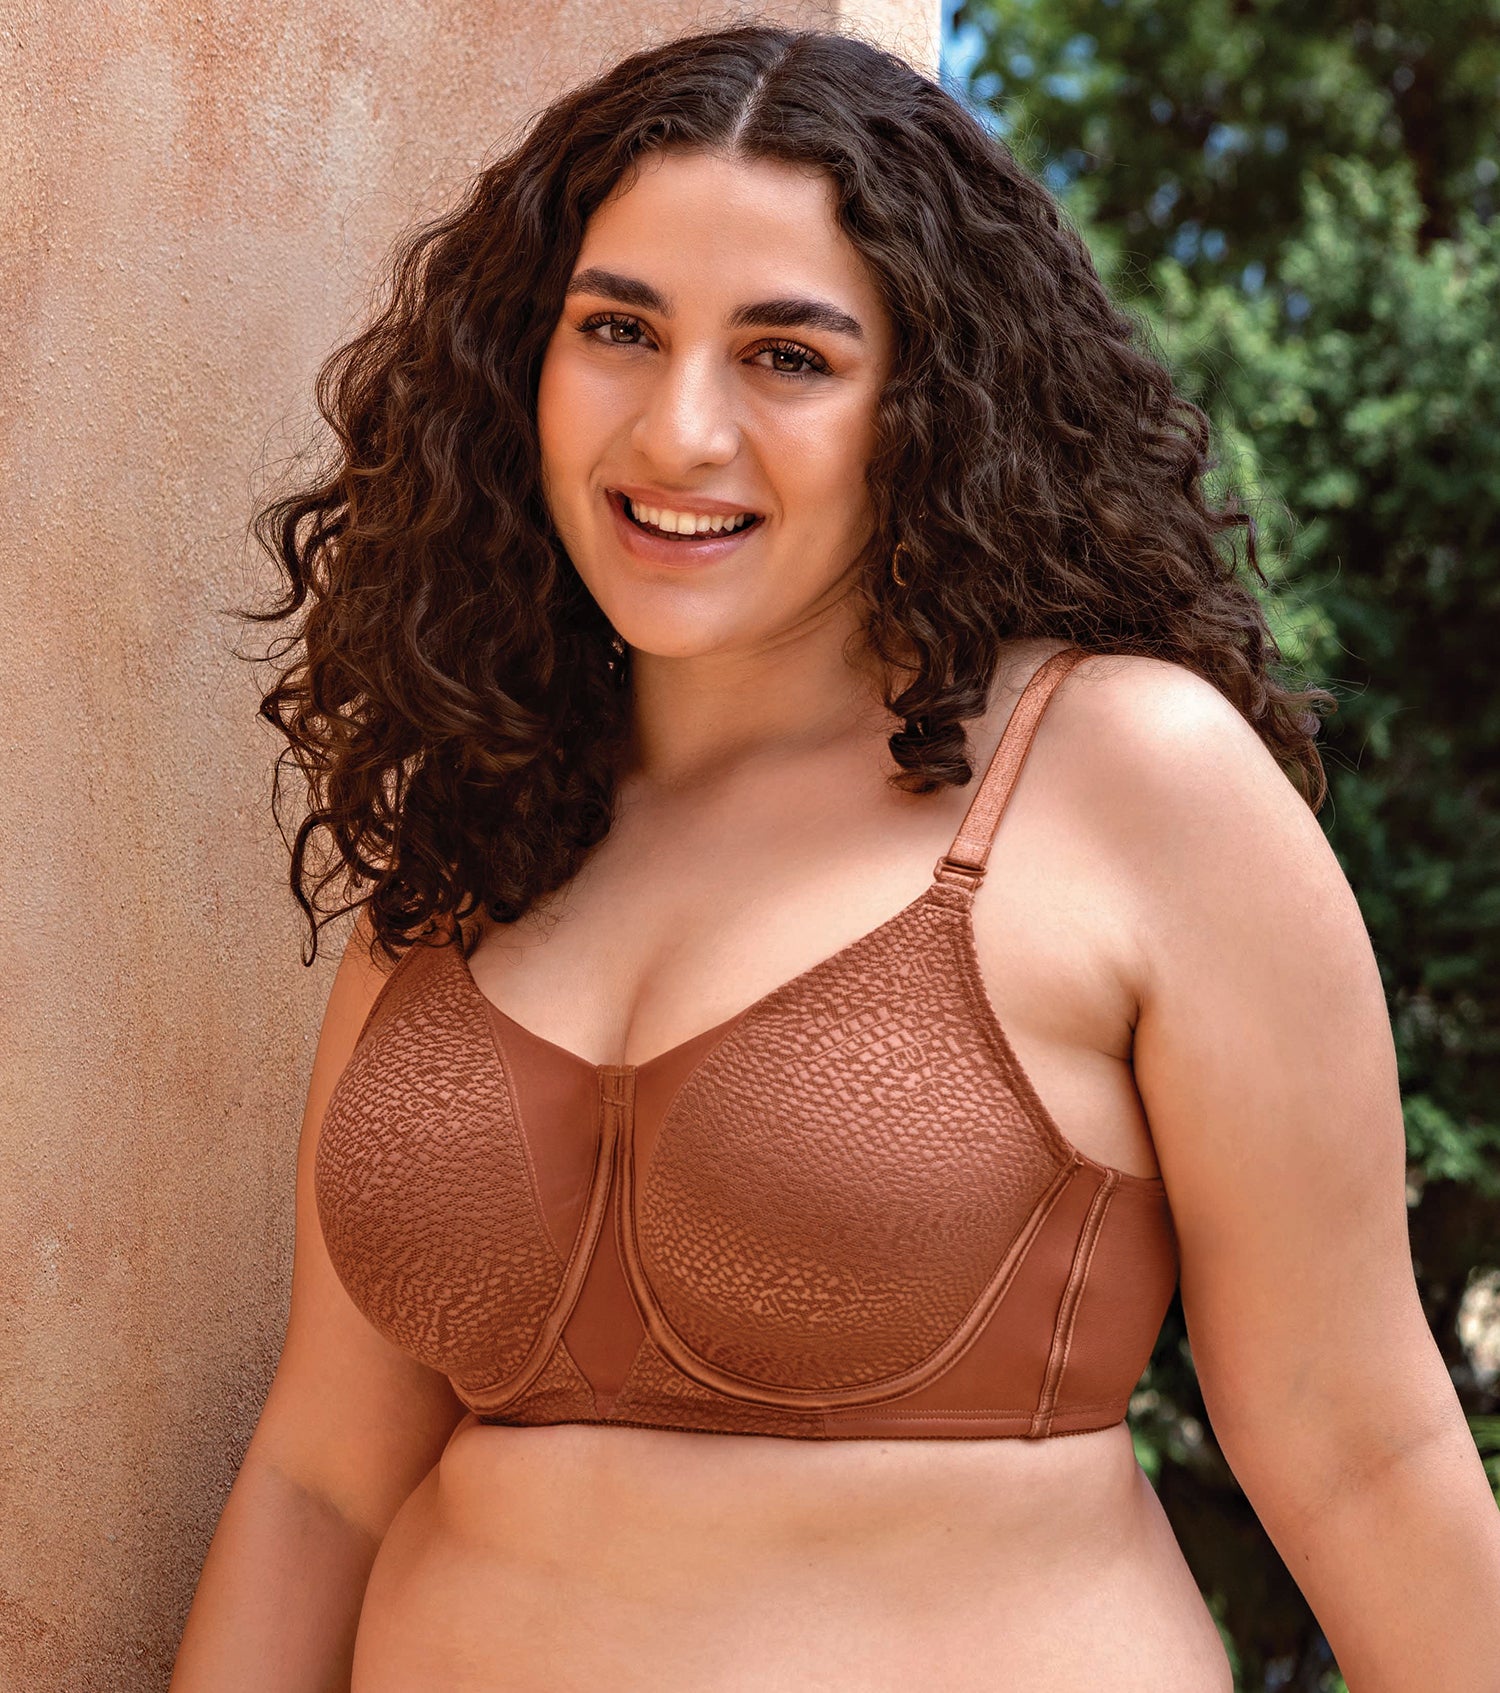 Enamor - Sweetly feminine yet distinctly alluring, this bra is an  irresistible mix of pretty and fashionable. Check it out -  .co.in/bras/dailies/f010/410/